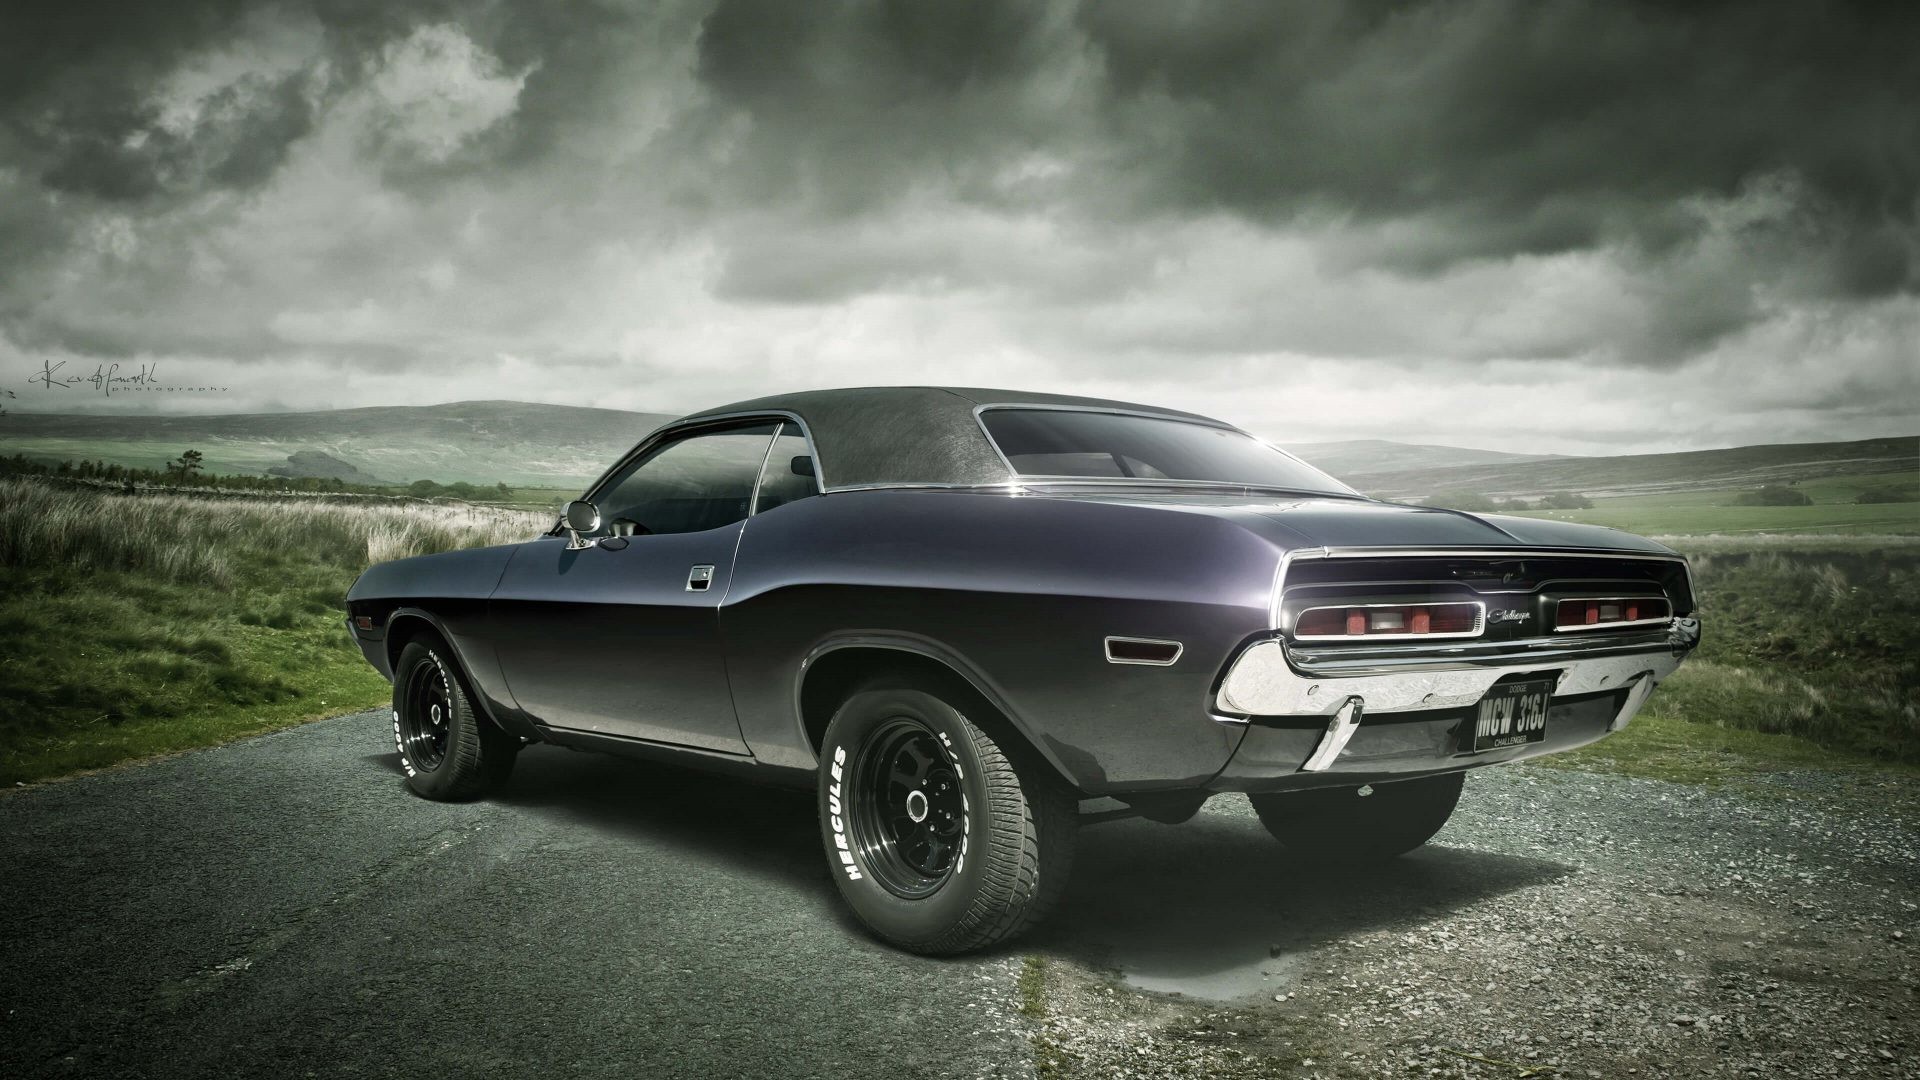 Muscle Cars in 1920x1080 Wallpapers (65+ images)
 Muscle Car Wallpaper 1920x1080